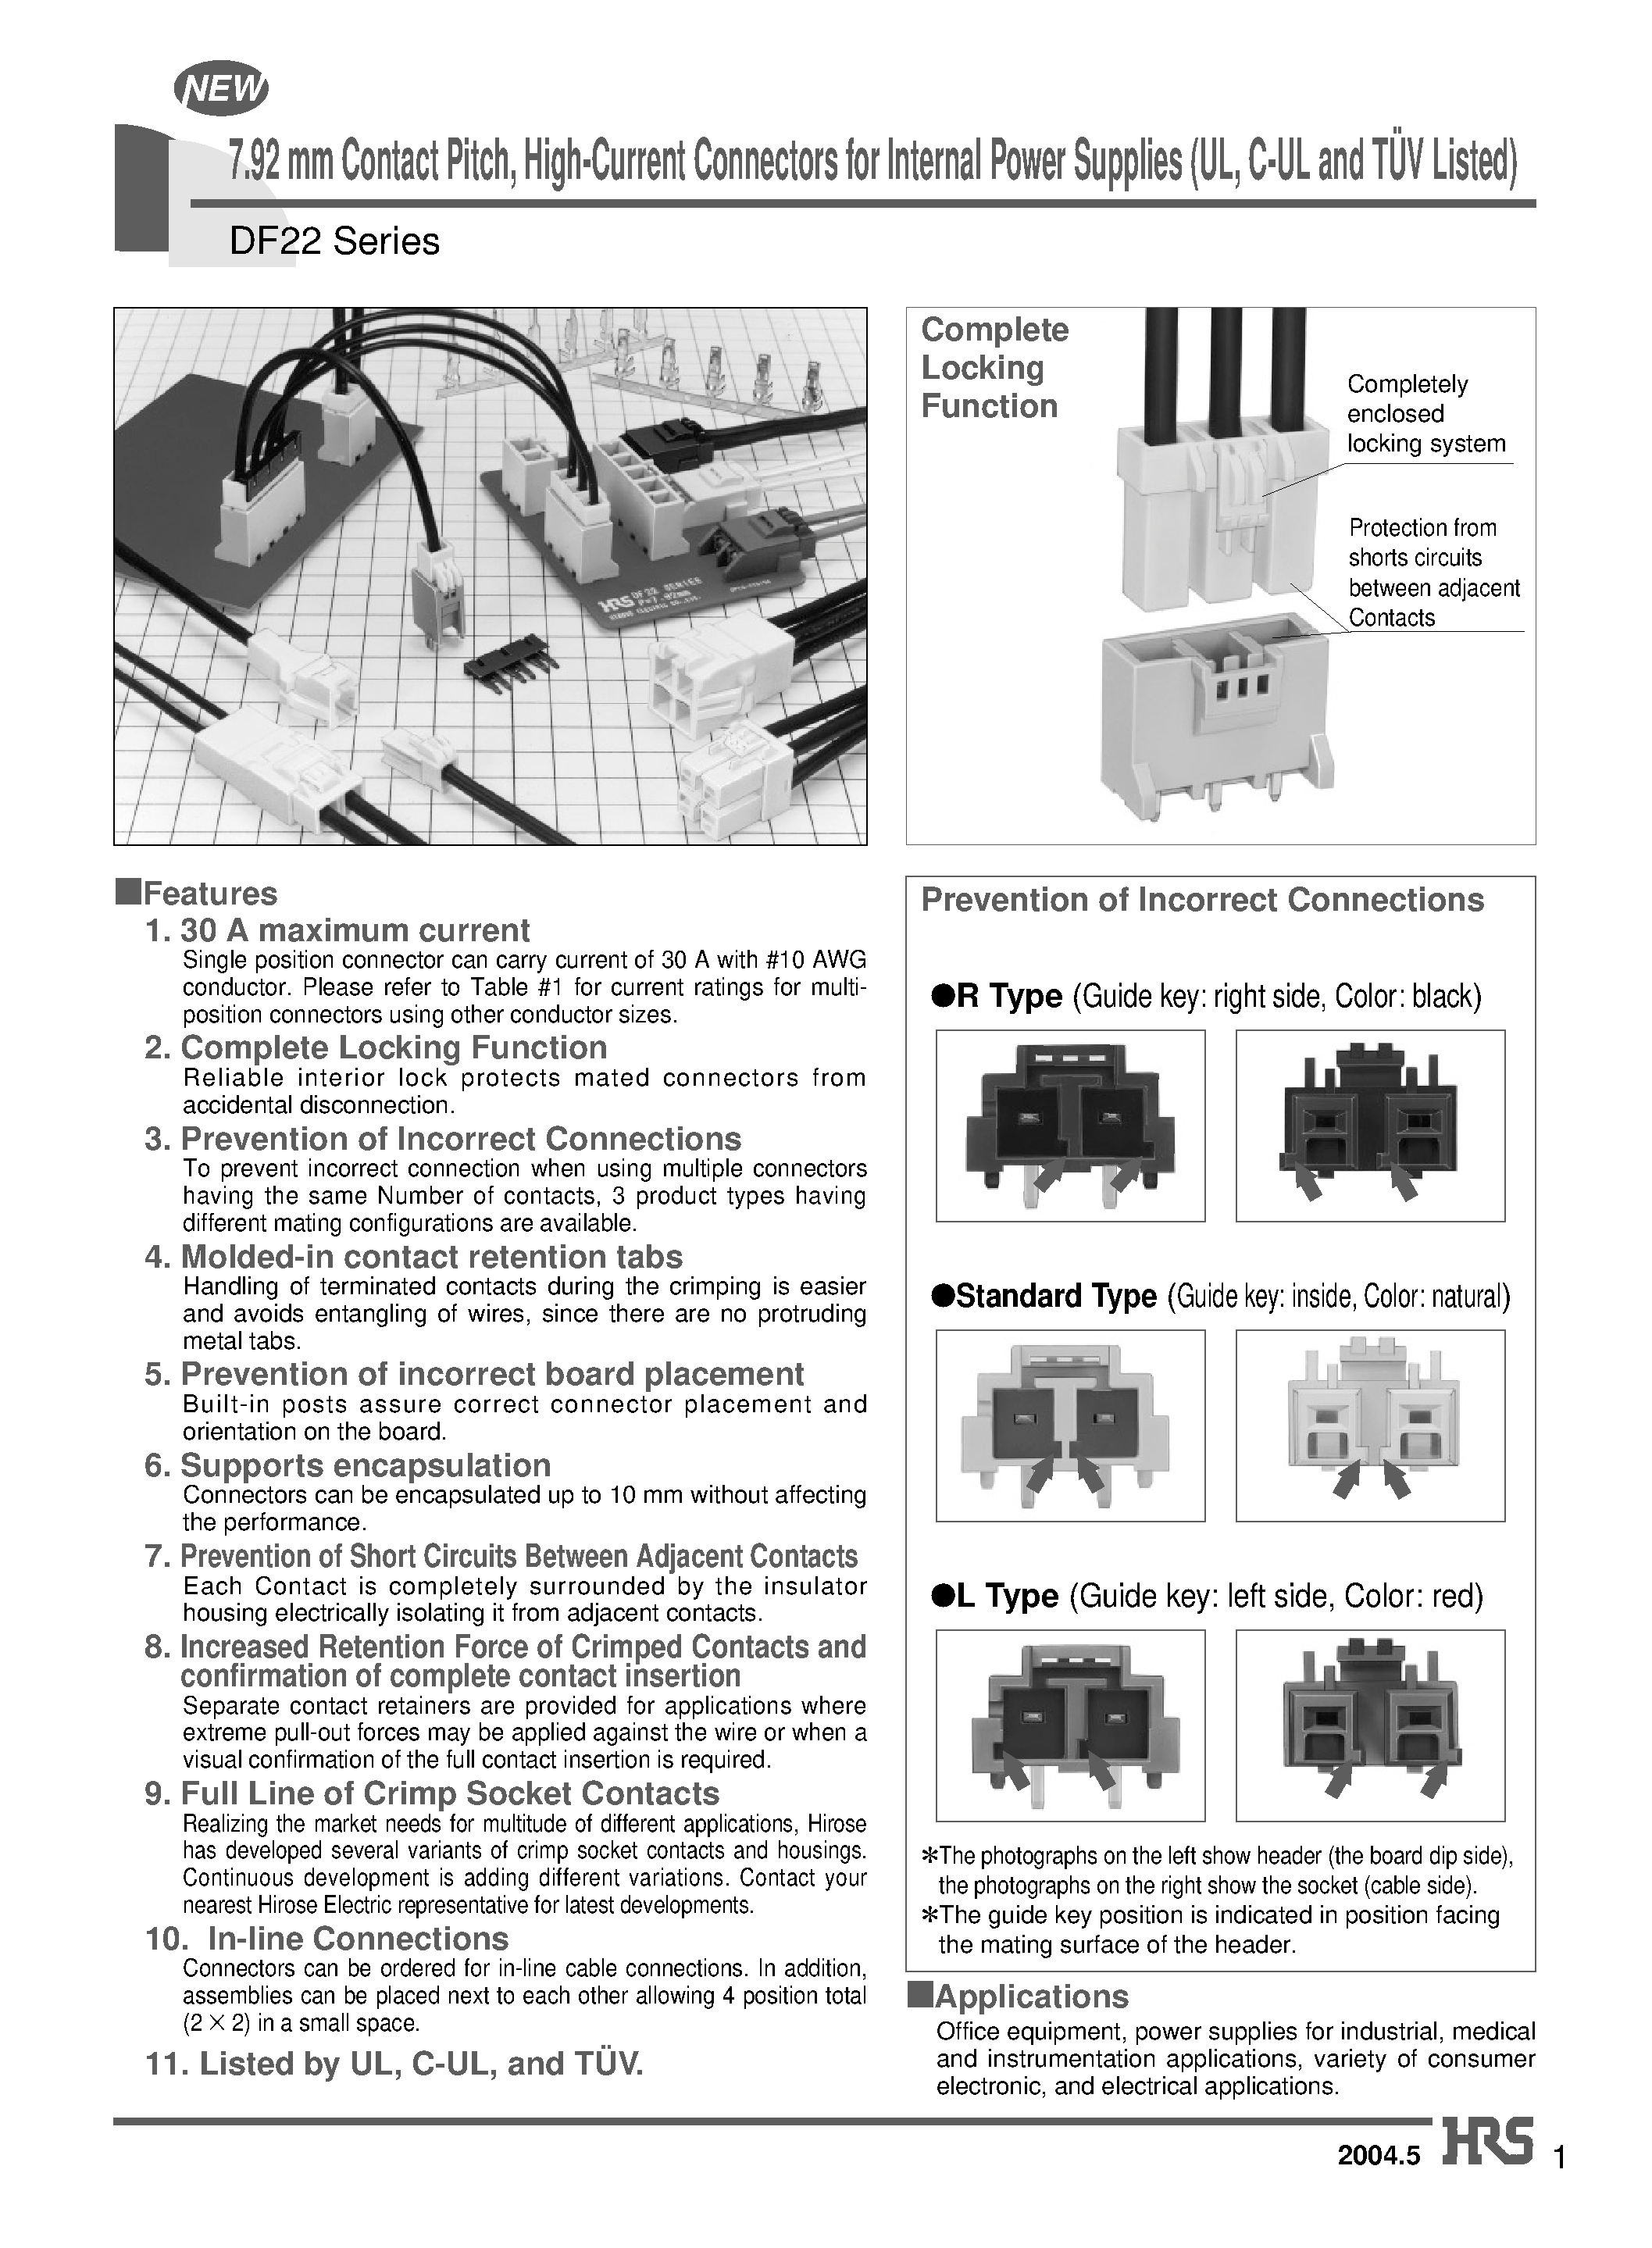 Datasheet DF22A-1P-7.92DSA - 7.92 mm Contact Pitch/ High-Current Connectors for Internal Power Supplies (UL/ C-UL and TUV Listed) page 1